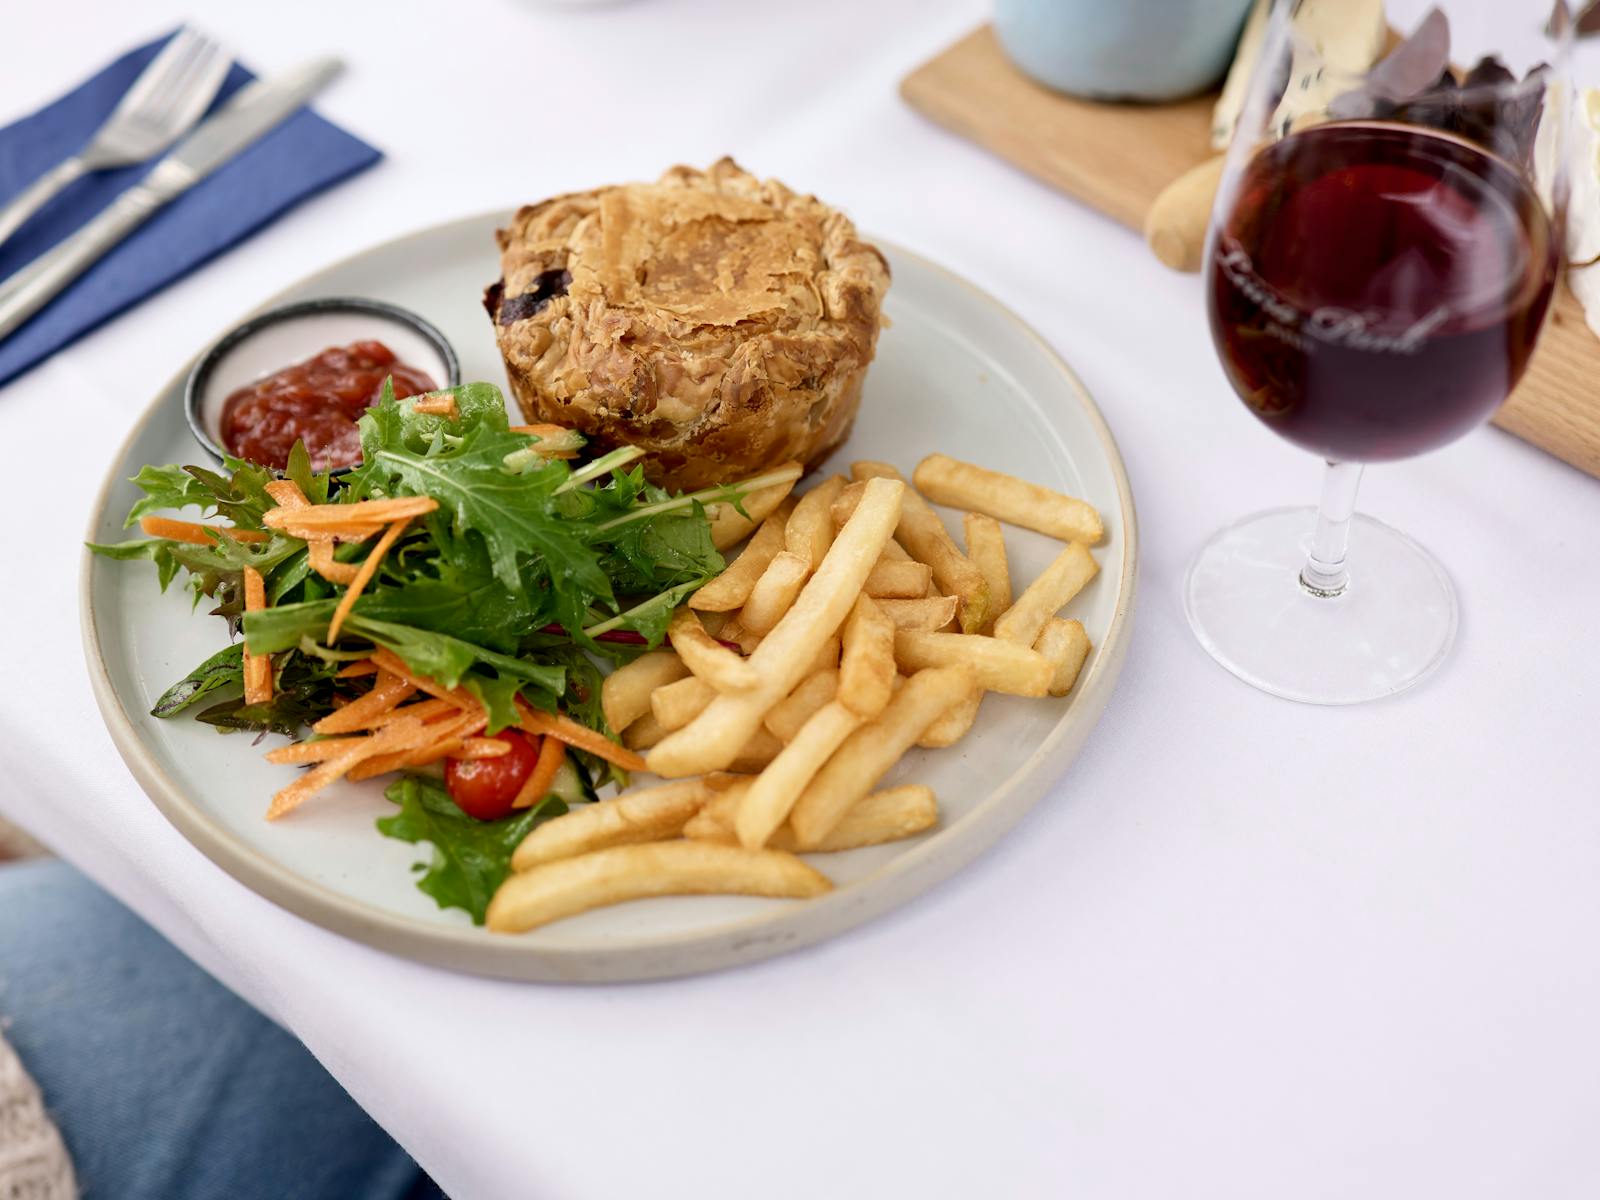 White tablecloth, a plate with a pie, chips and salad, and a glass of red wine